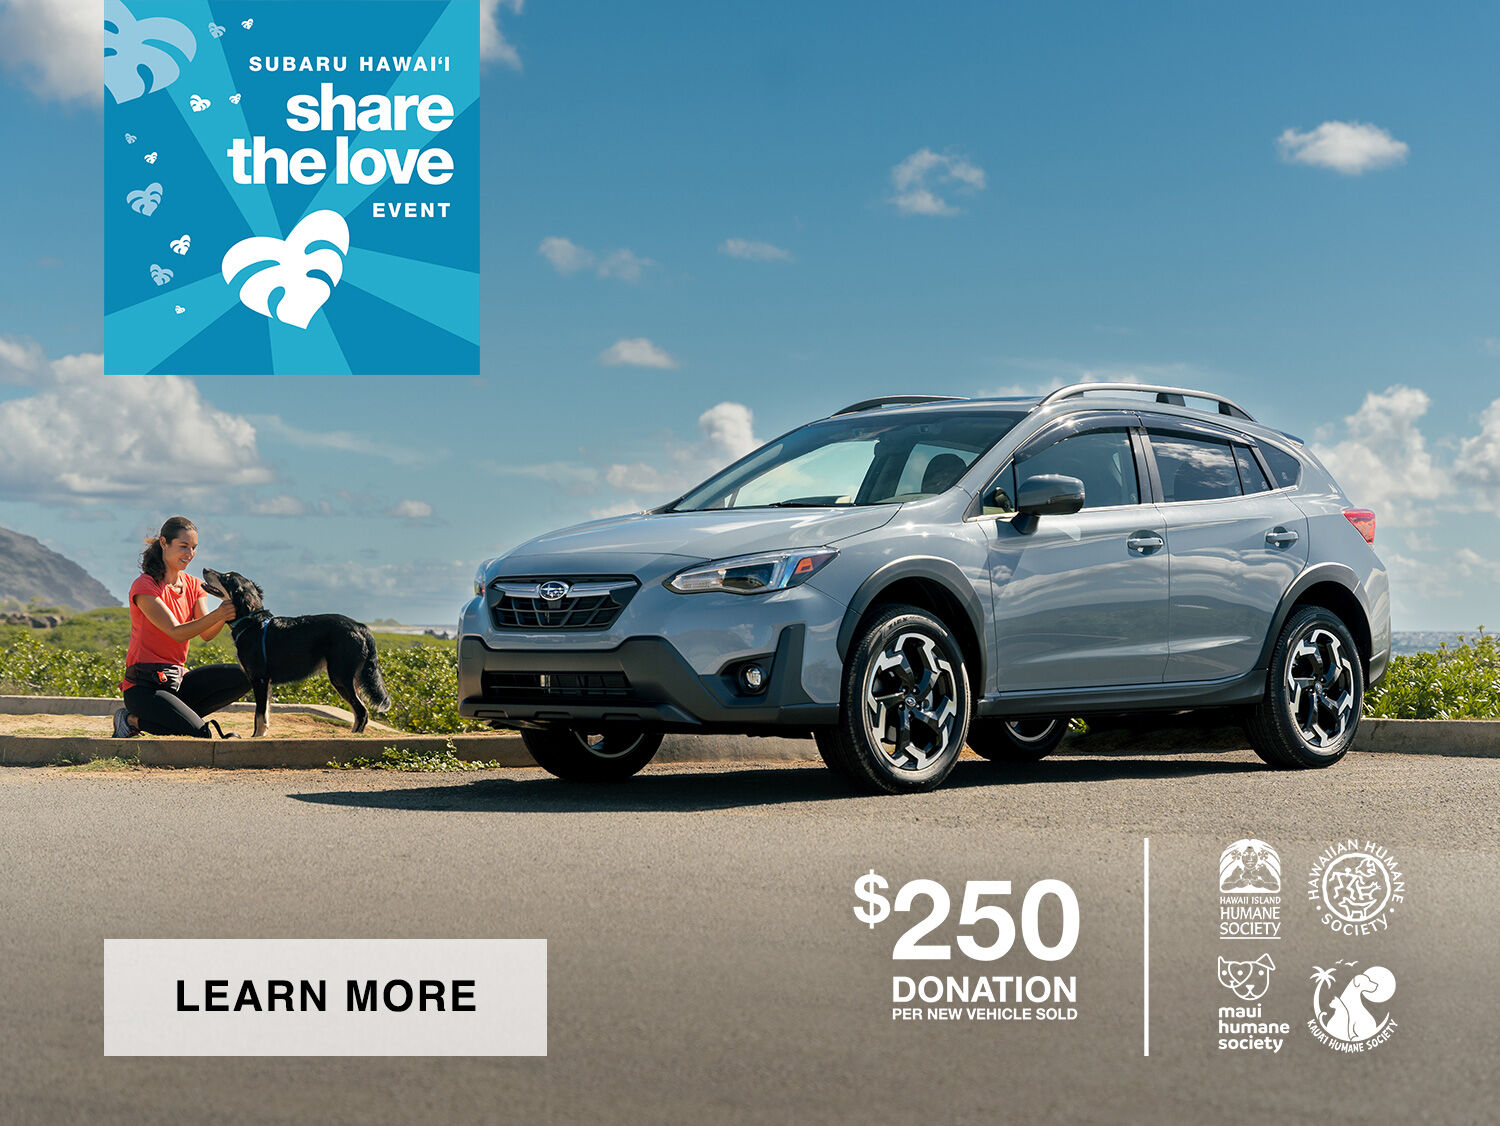 The 2022 Crosstrek. Share the Love Event - $250 donation per new vehicle sold.